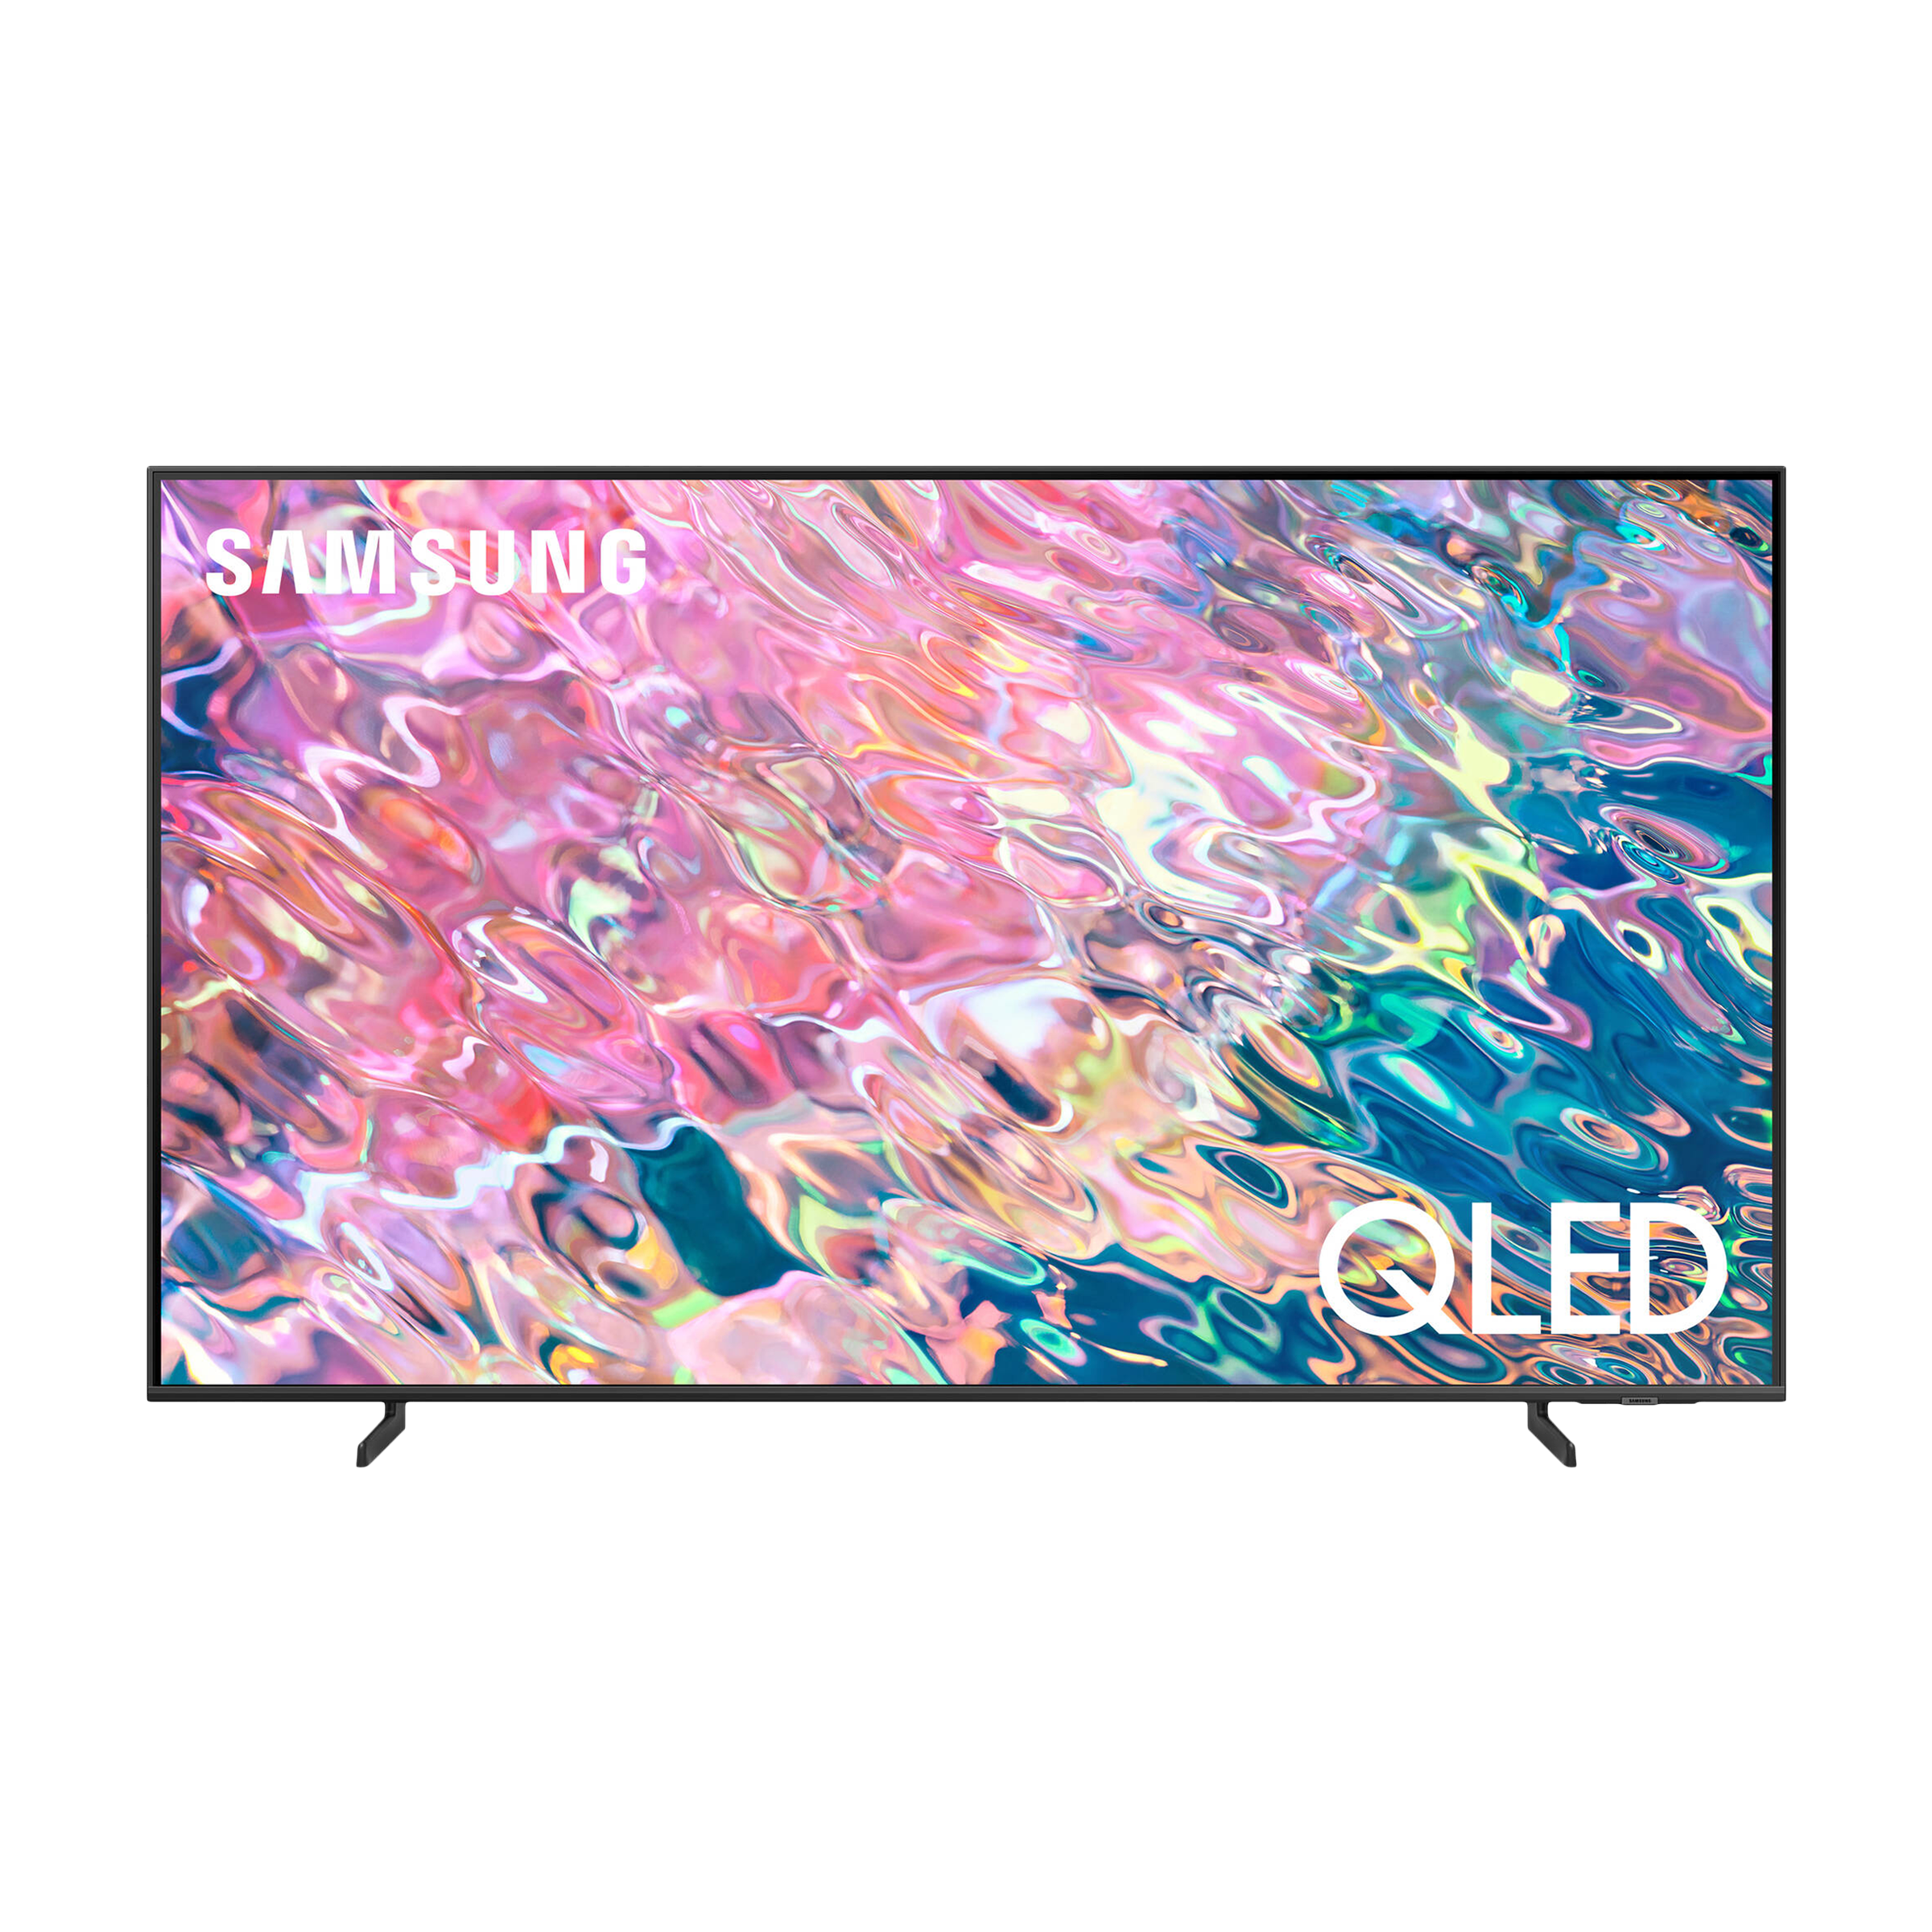 SAMSUNG Series 6 138 cm (55 inch) QLED 4K Ultra HD Tizen TV with Alexa Compatibility_1